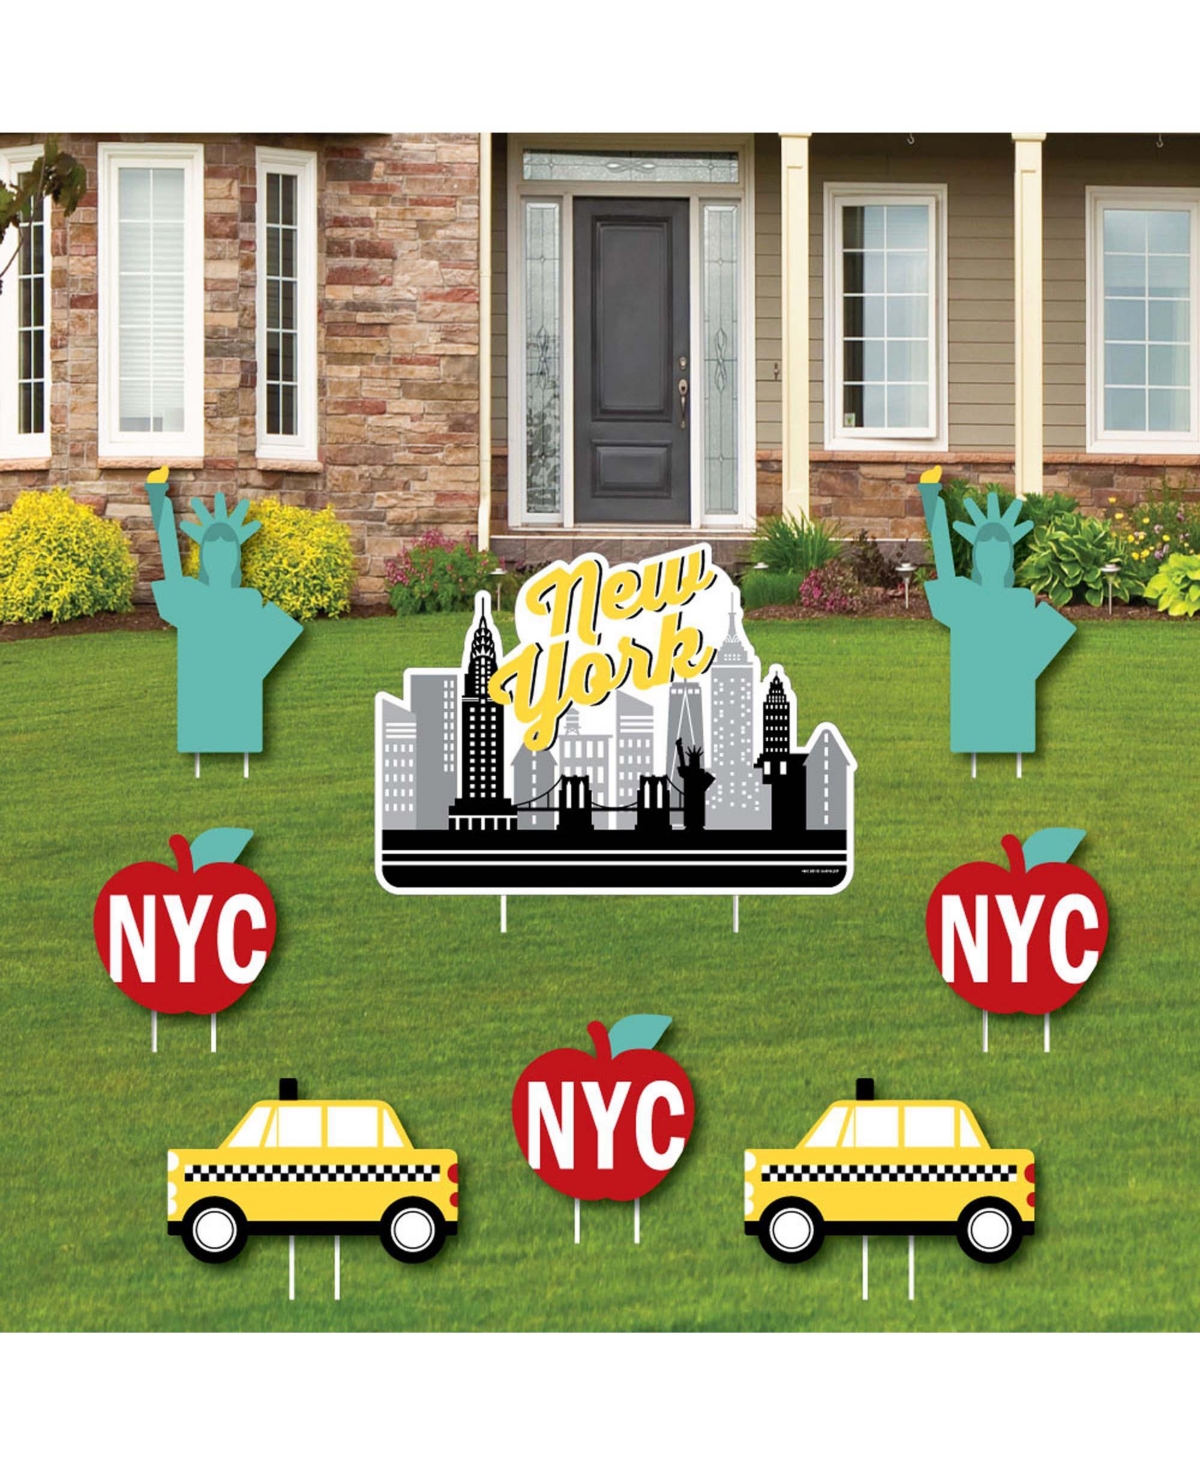 Nyc Cityscape - Outdoor Lawn Decor - New York City Party Yard Signs - Set of 8